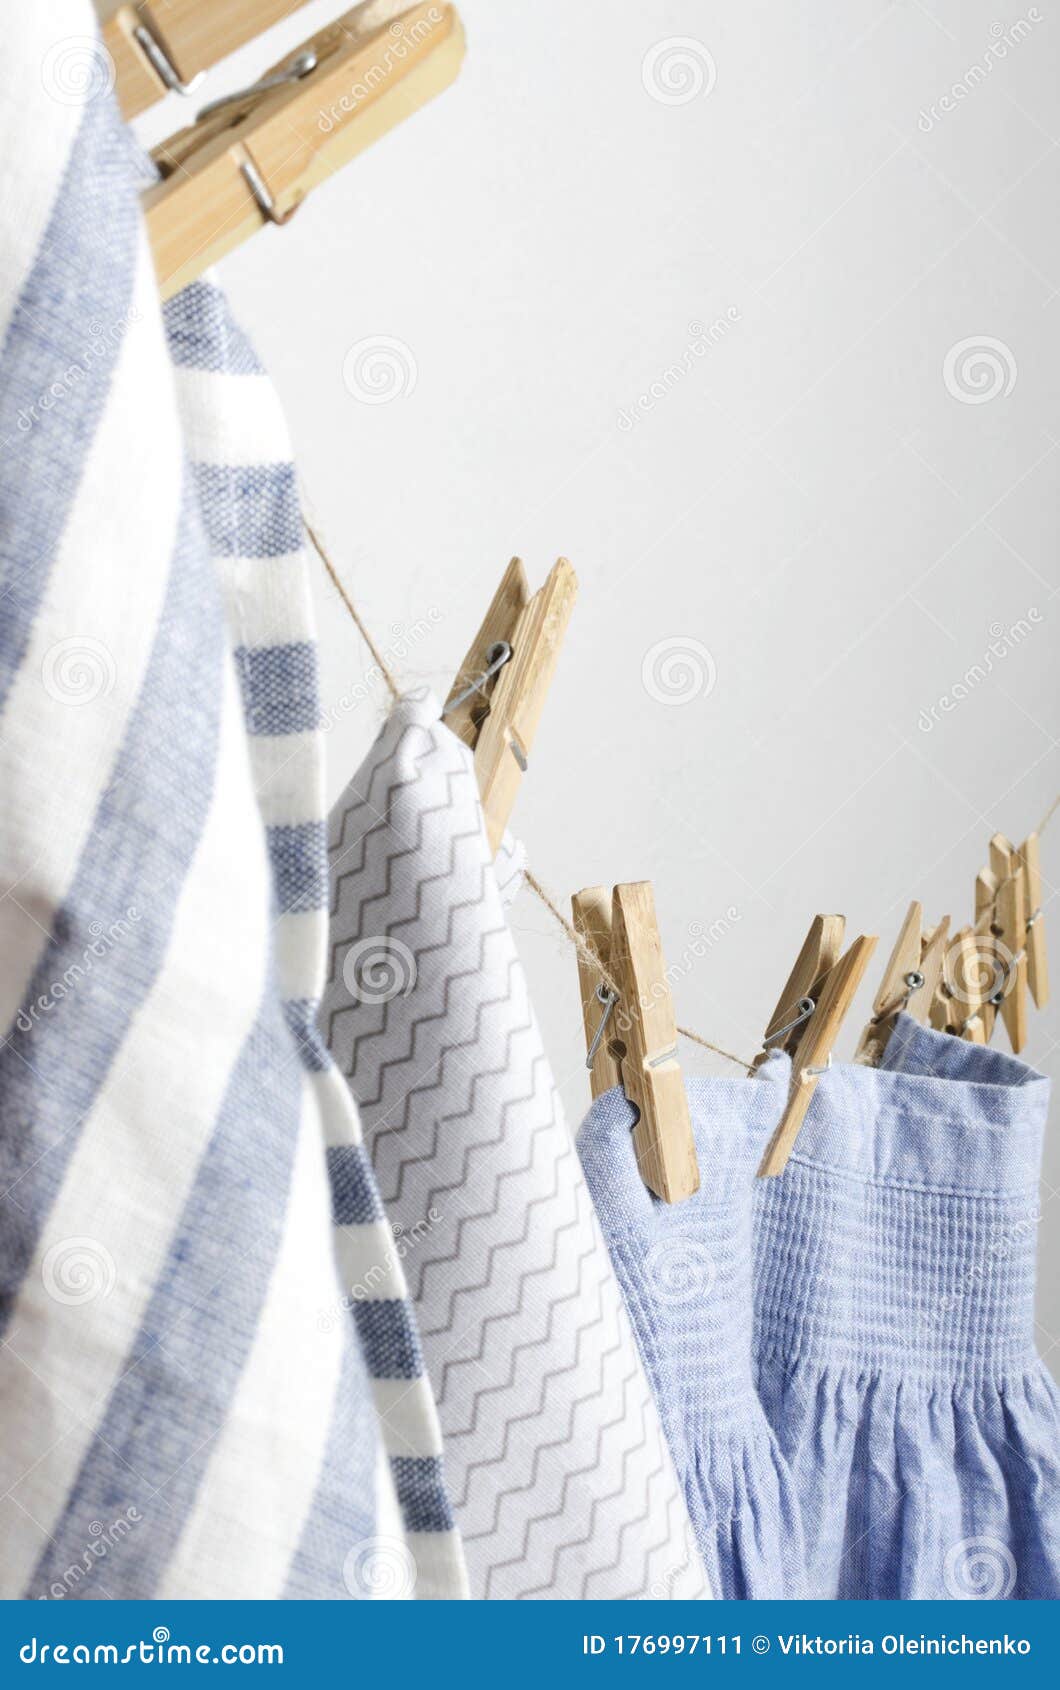 https://thumbs.dreamstime.com/z/vertical-image-laundry-drying-rope-hanging-wooden-pegs-different-kinds-clothes-rustic-blue-ad-white-fabrics-176997111.jpg